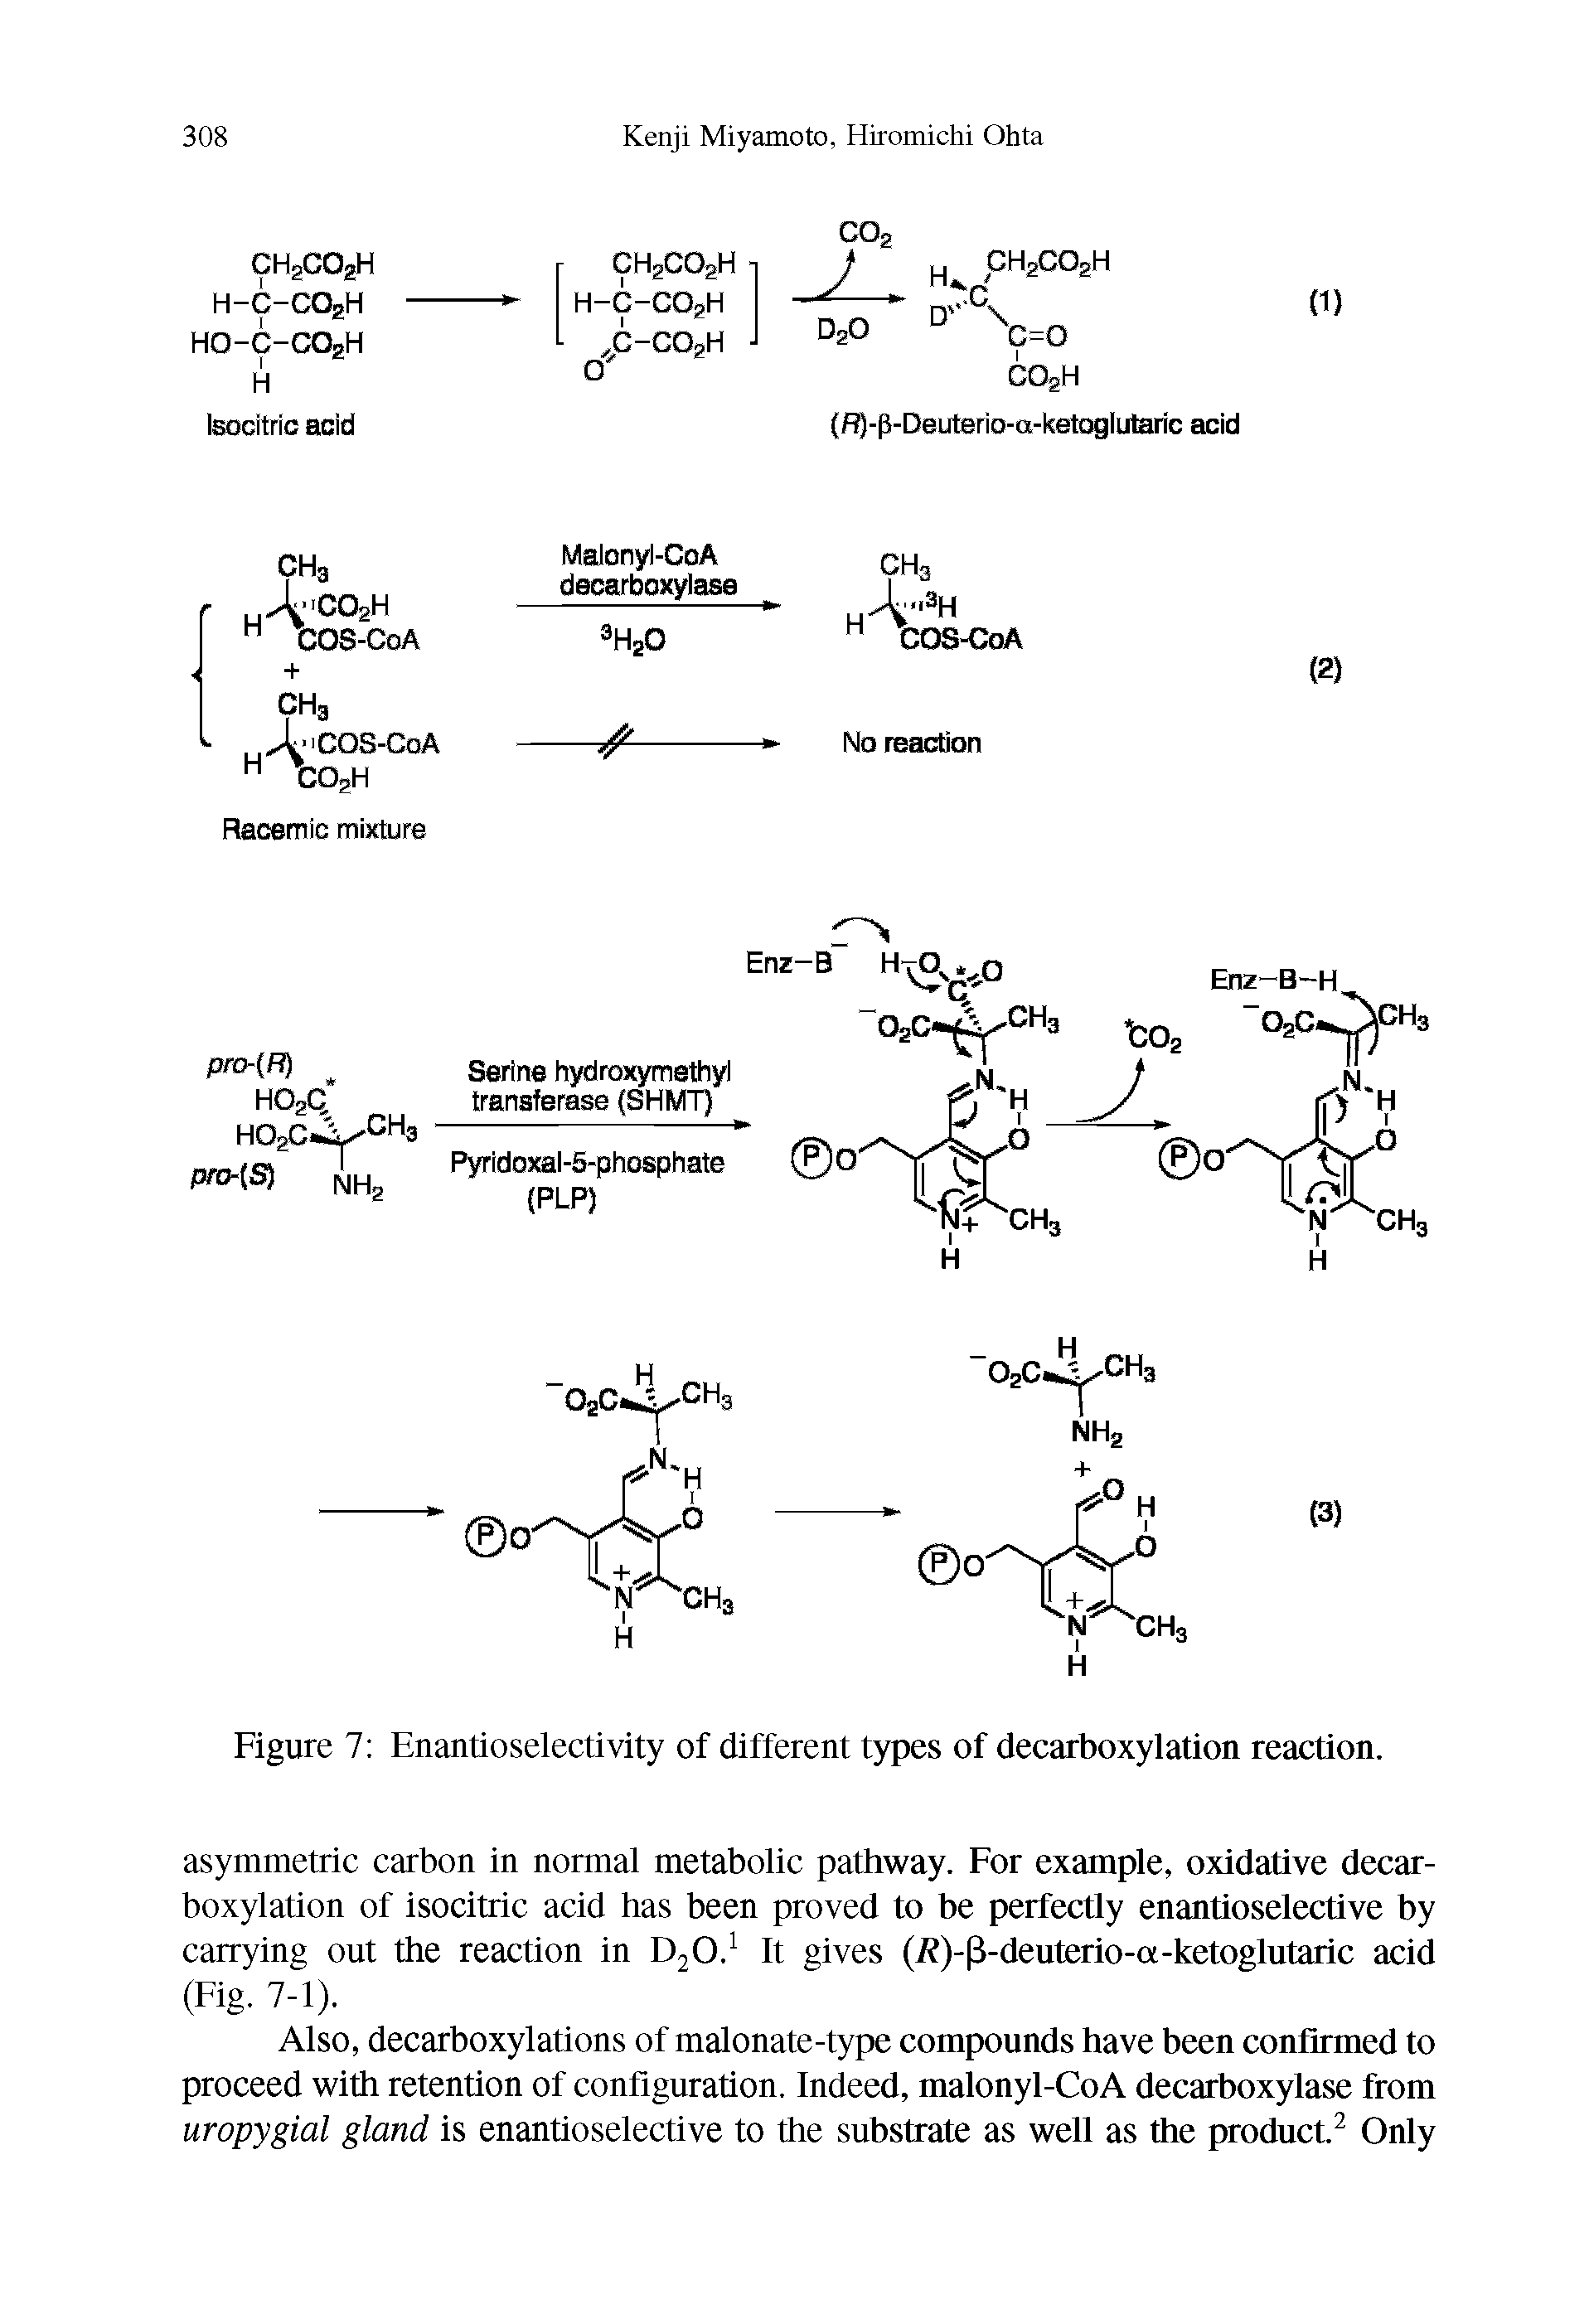 Figure 7 Enantioselectivity of different types of decarboxylation reaction.